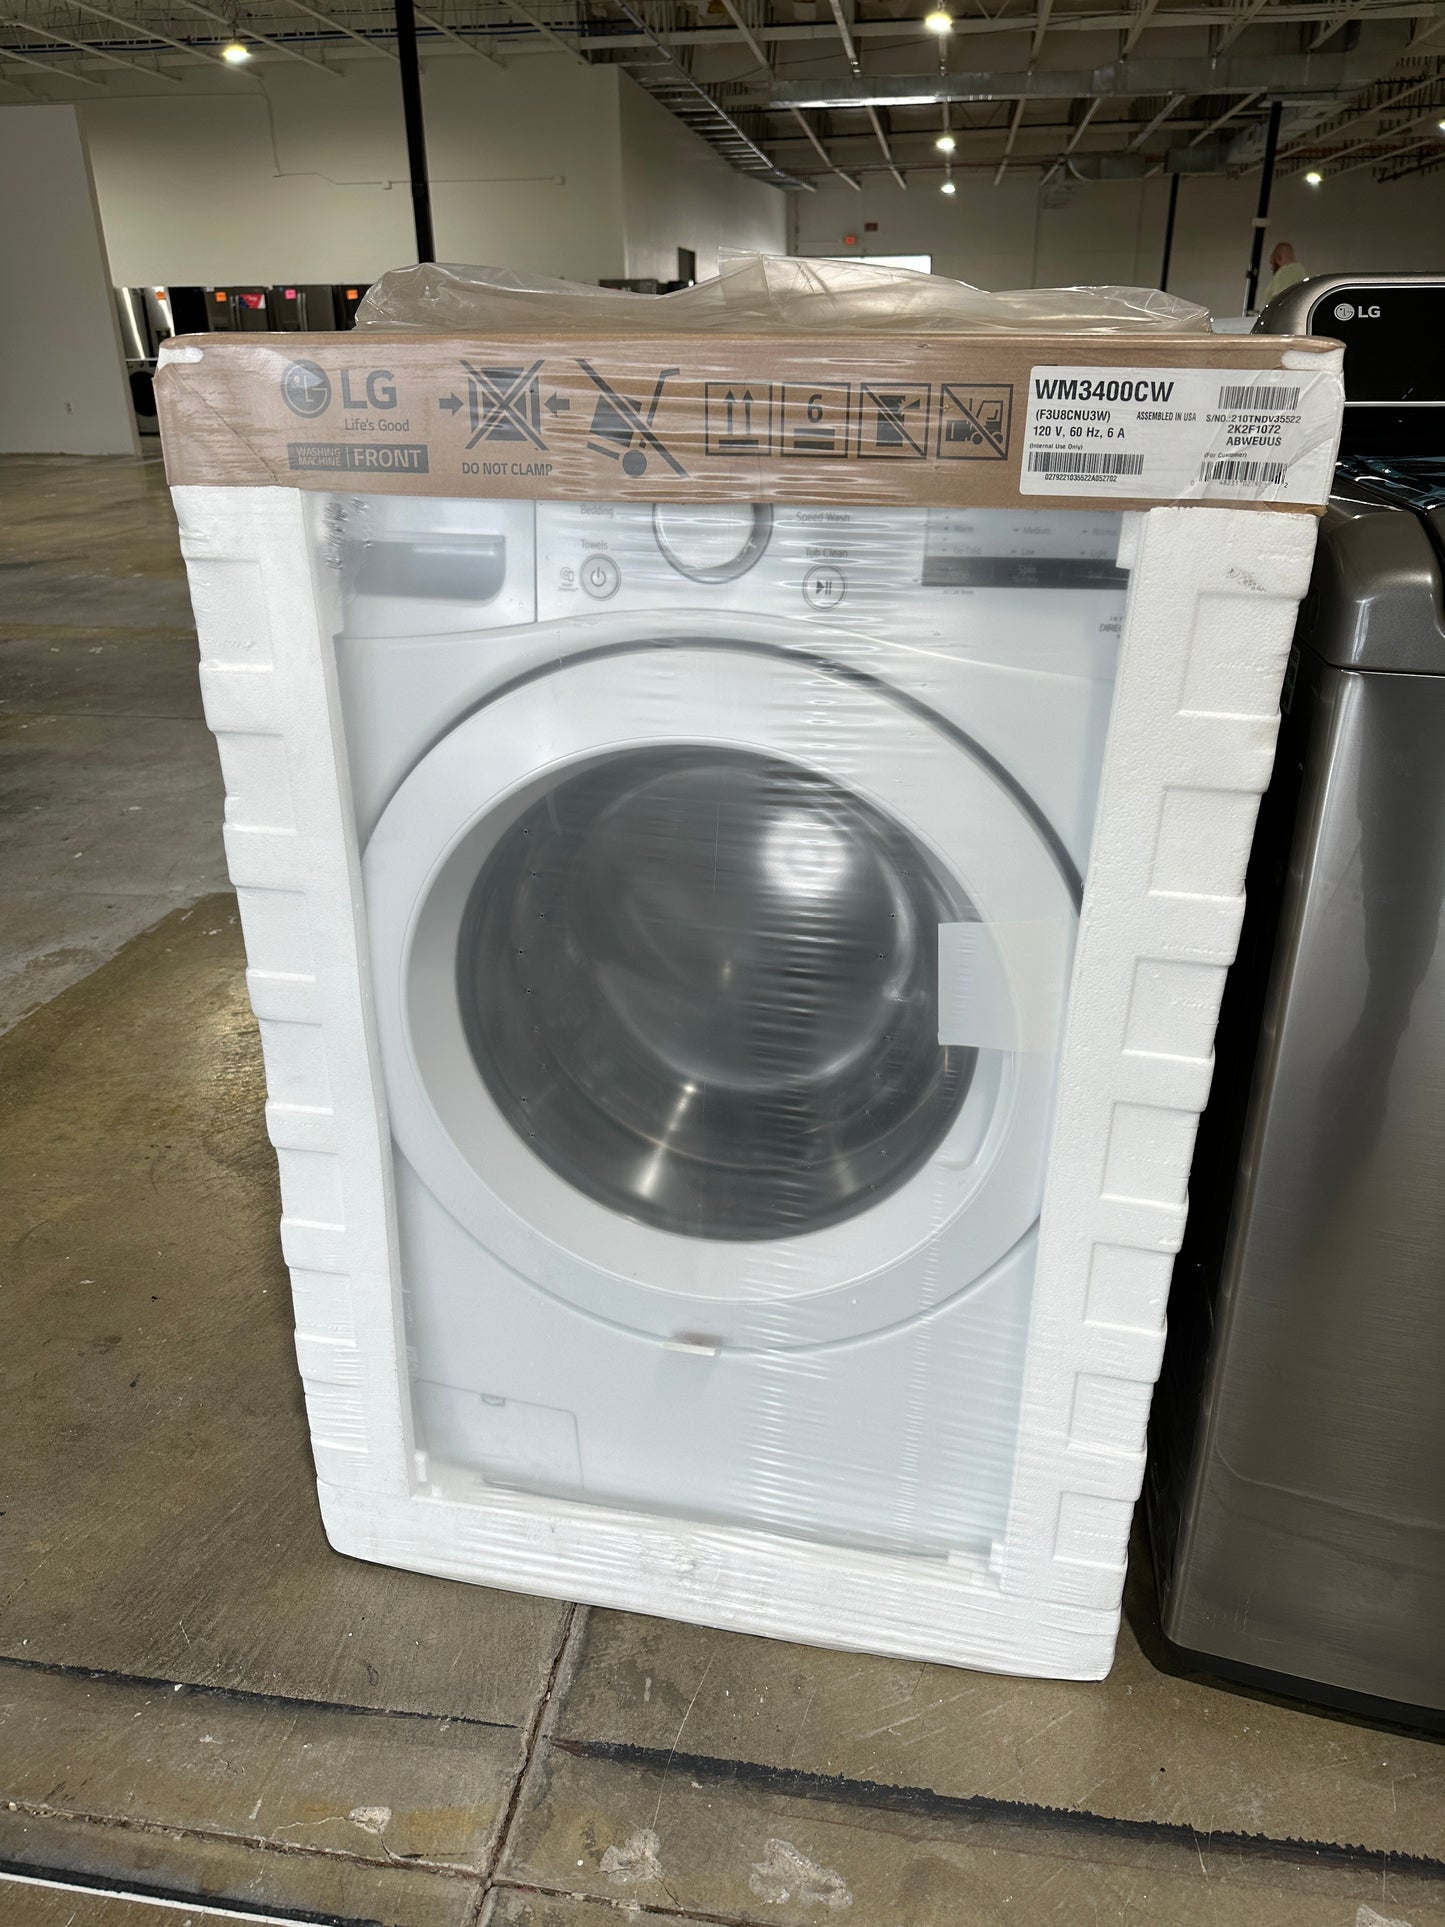 NEW WITH FULL LG WARRANTY FRONT LOAD WASHER - WAS11817S WM3400CW